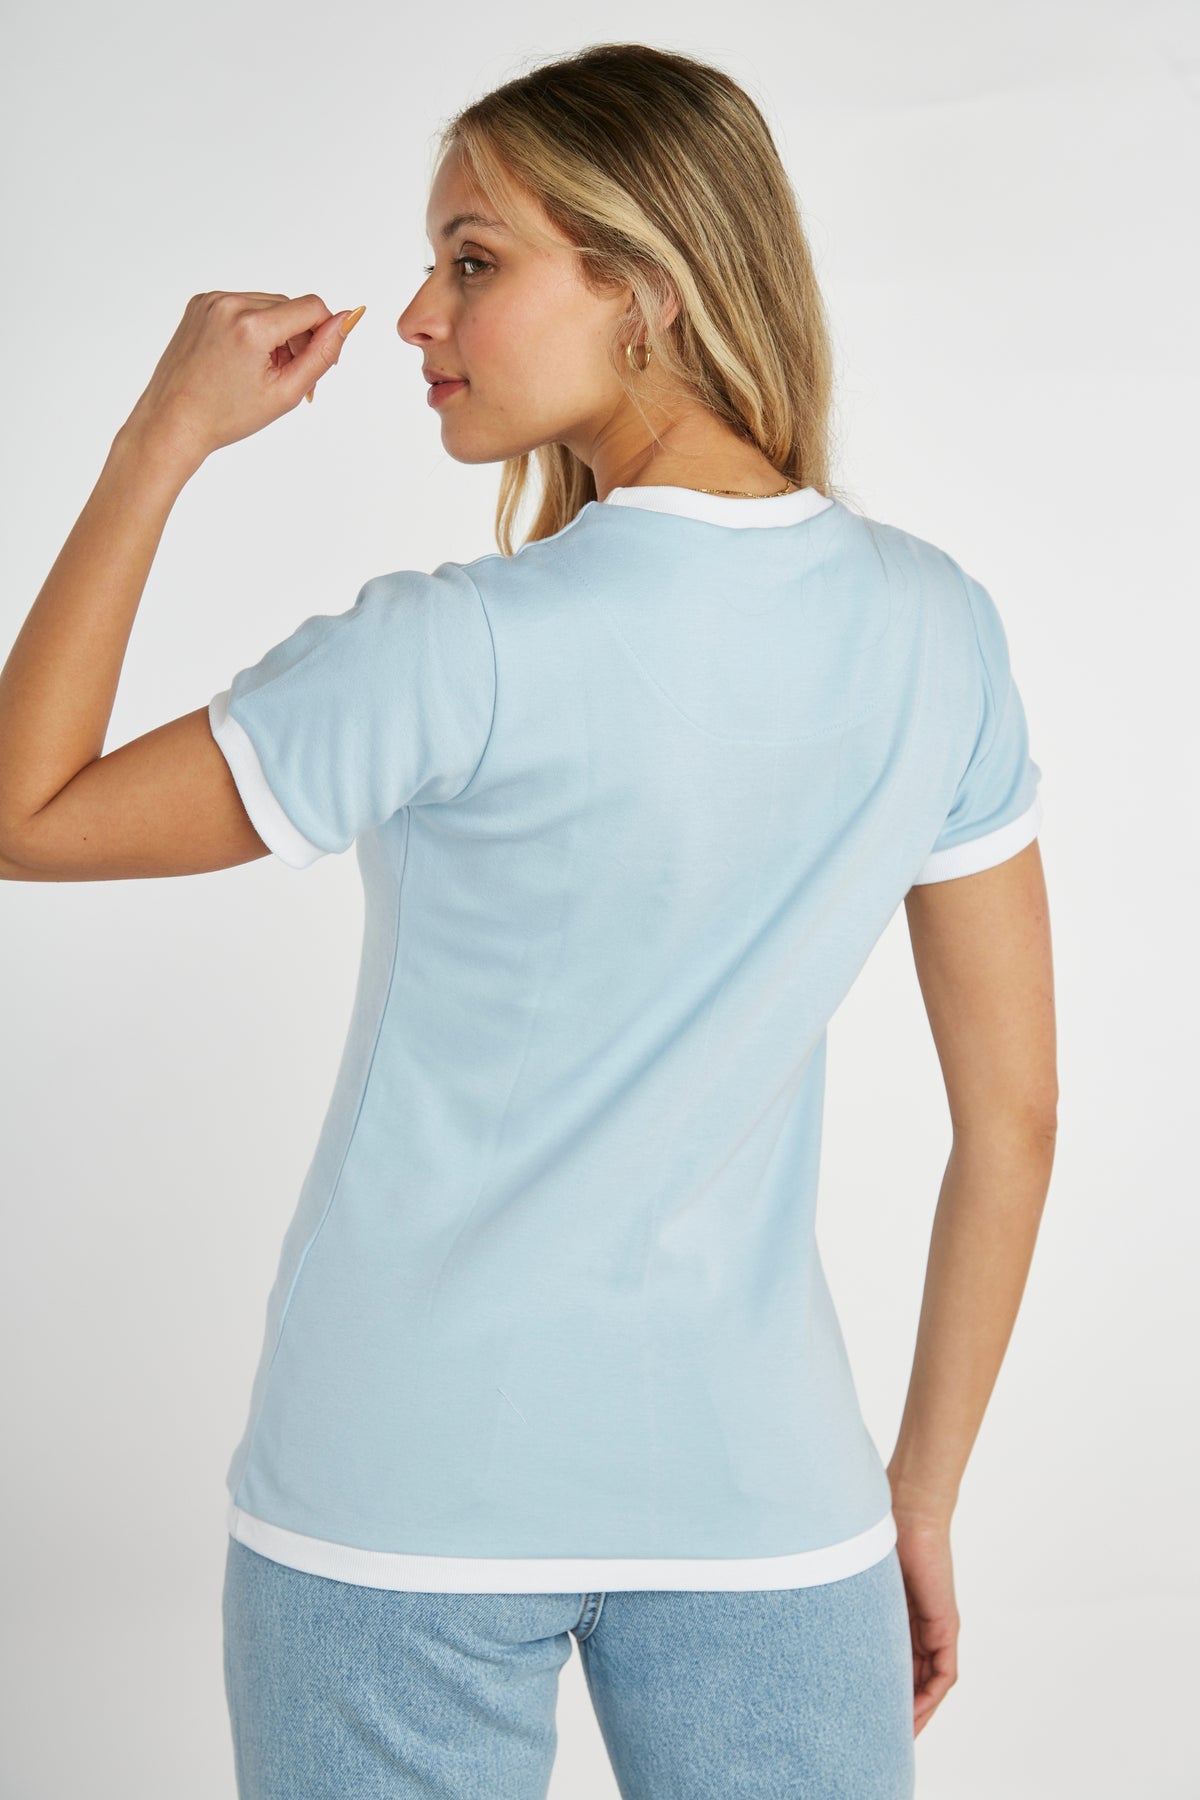 Brancaster T-Shirt - Blue - Whale Of A Time Clothing